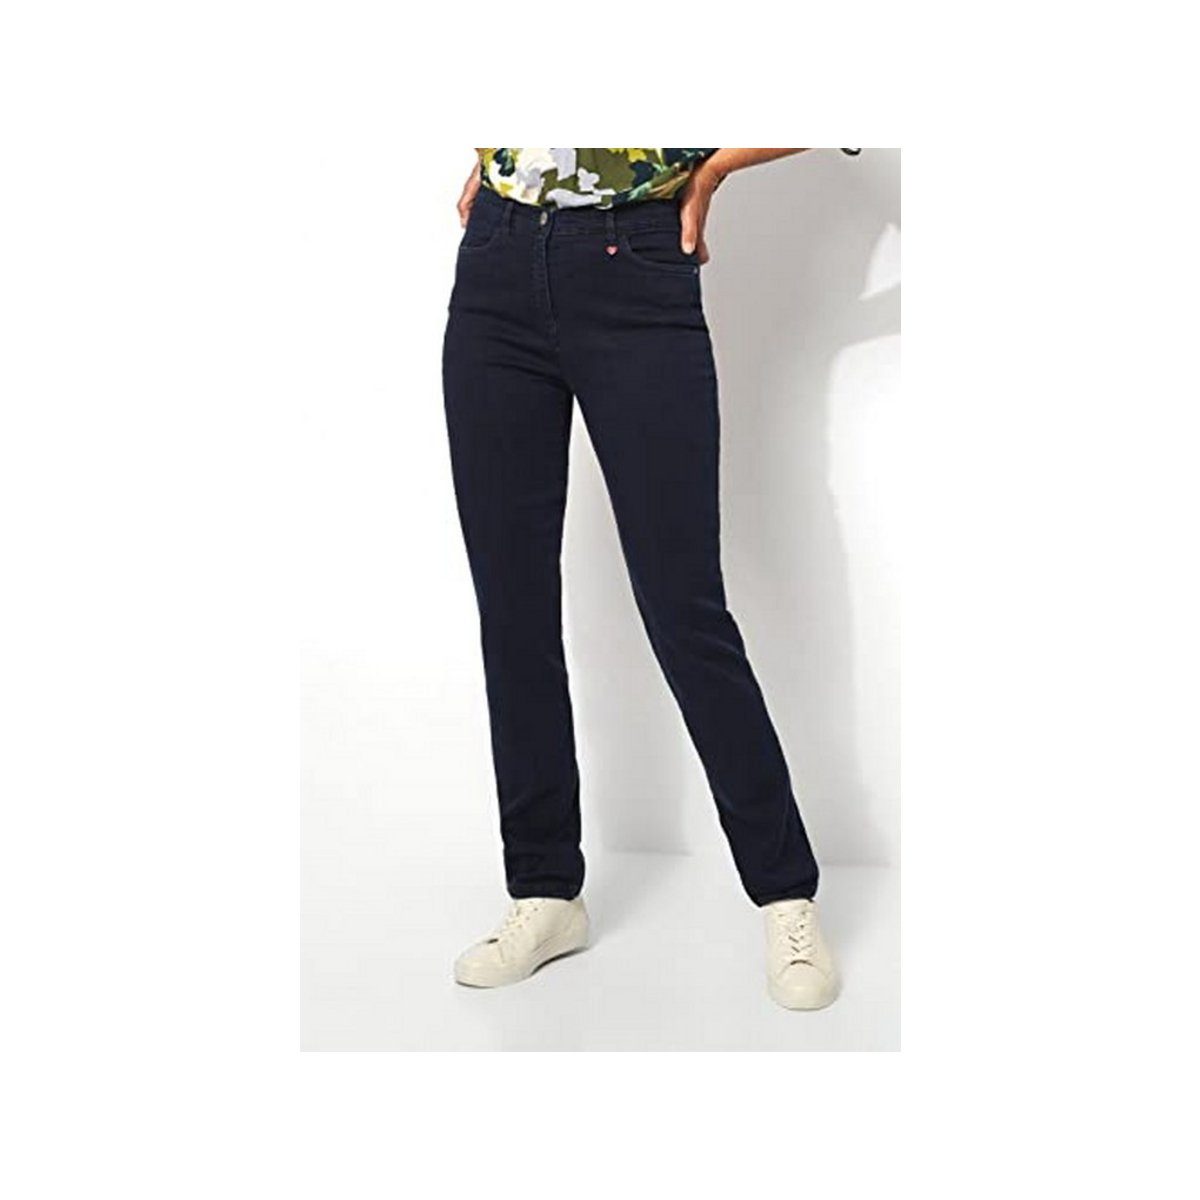 Relaxed by TONI (1-tlg) kombi 5-Pocket-Jeans